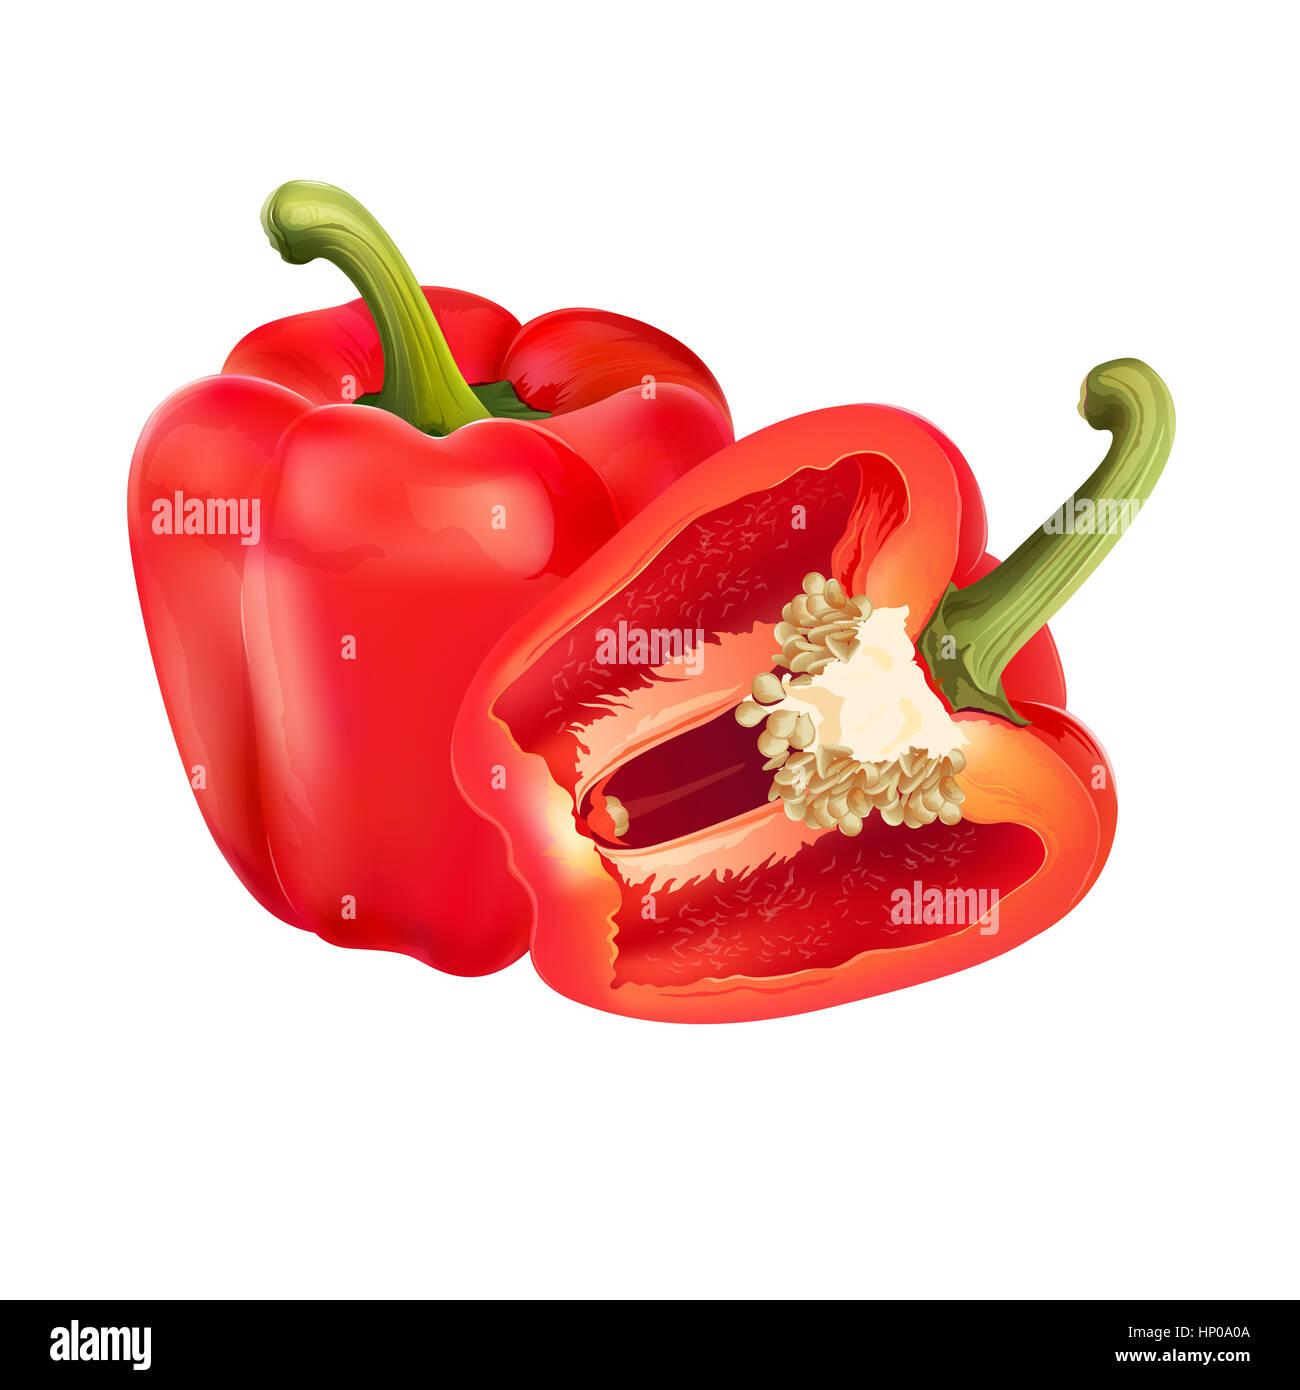 Red pepper on white background Stock Photo